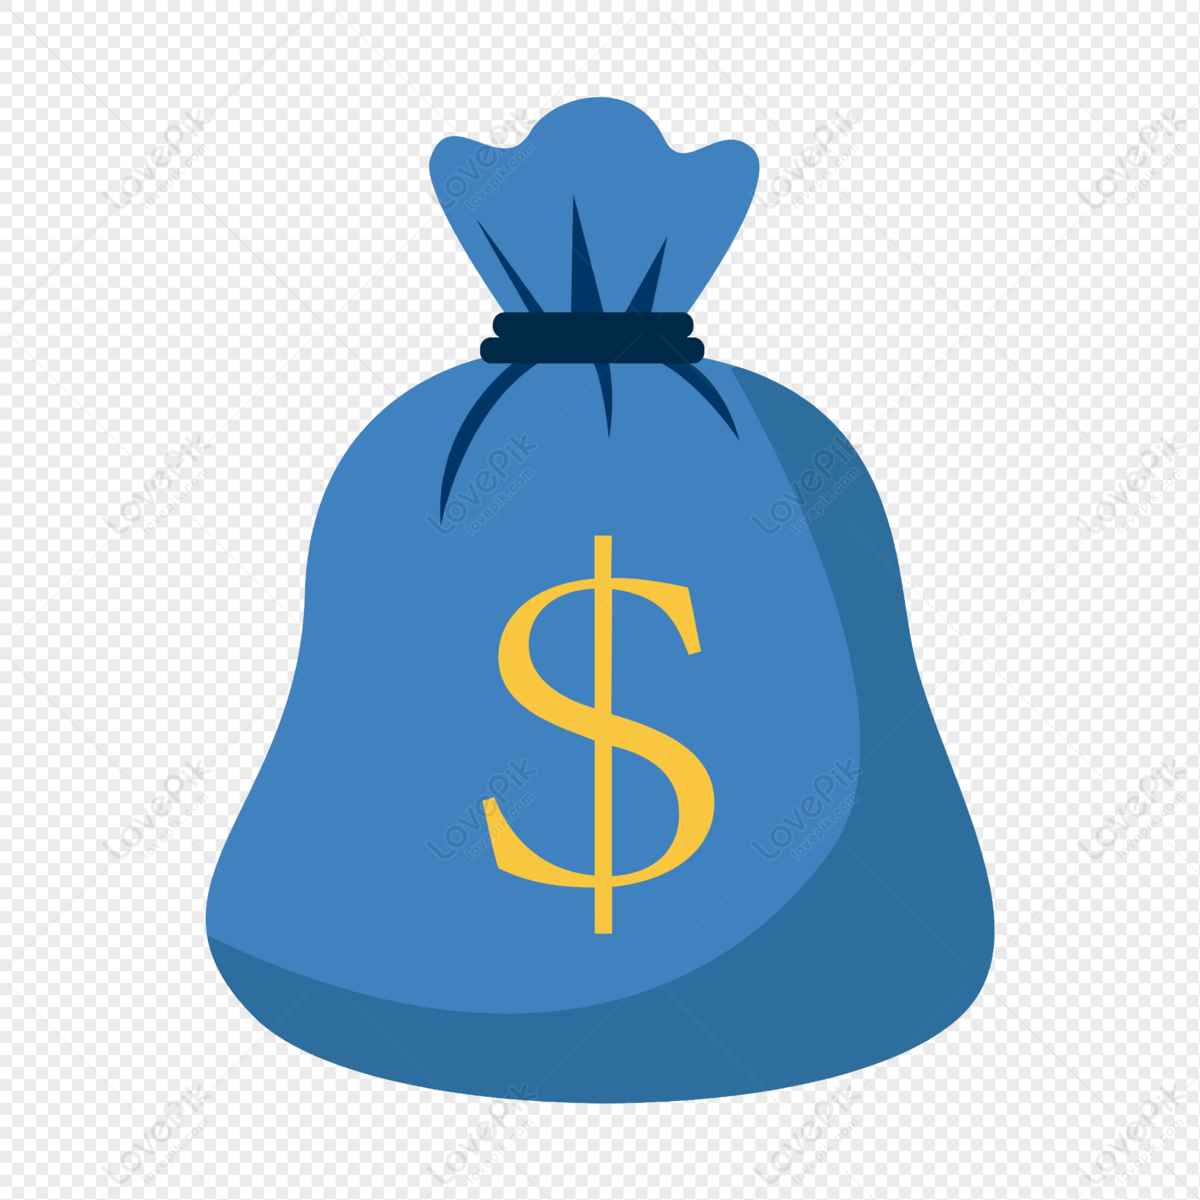 Money Bag Full of Coins. 15082211 PNG